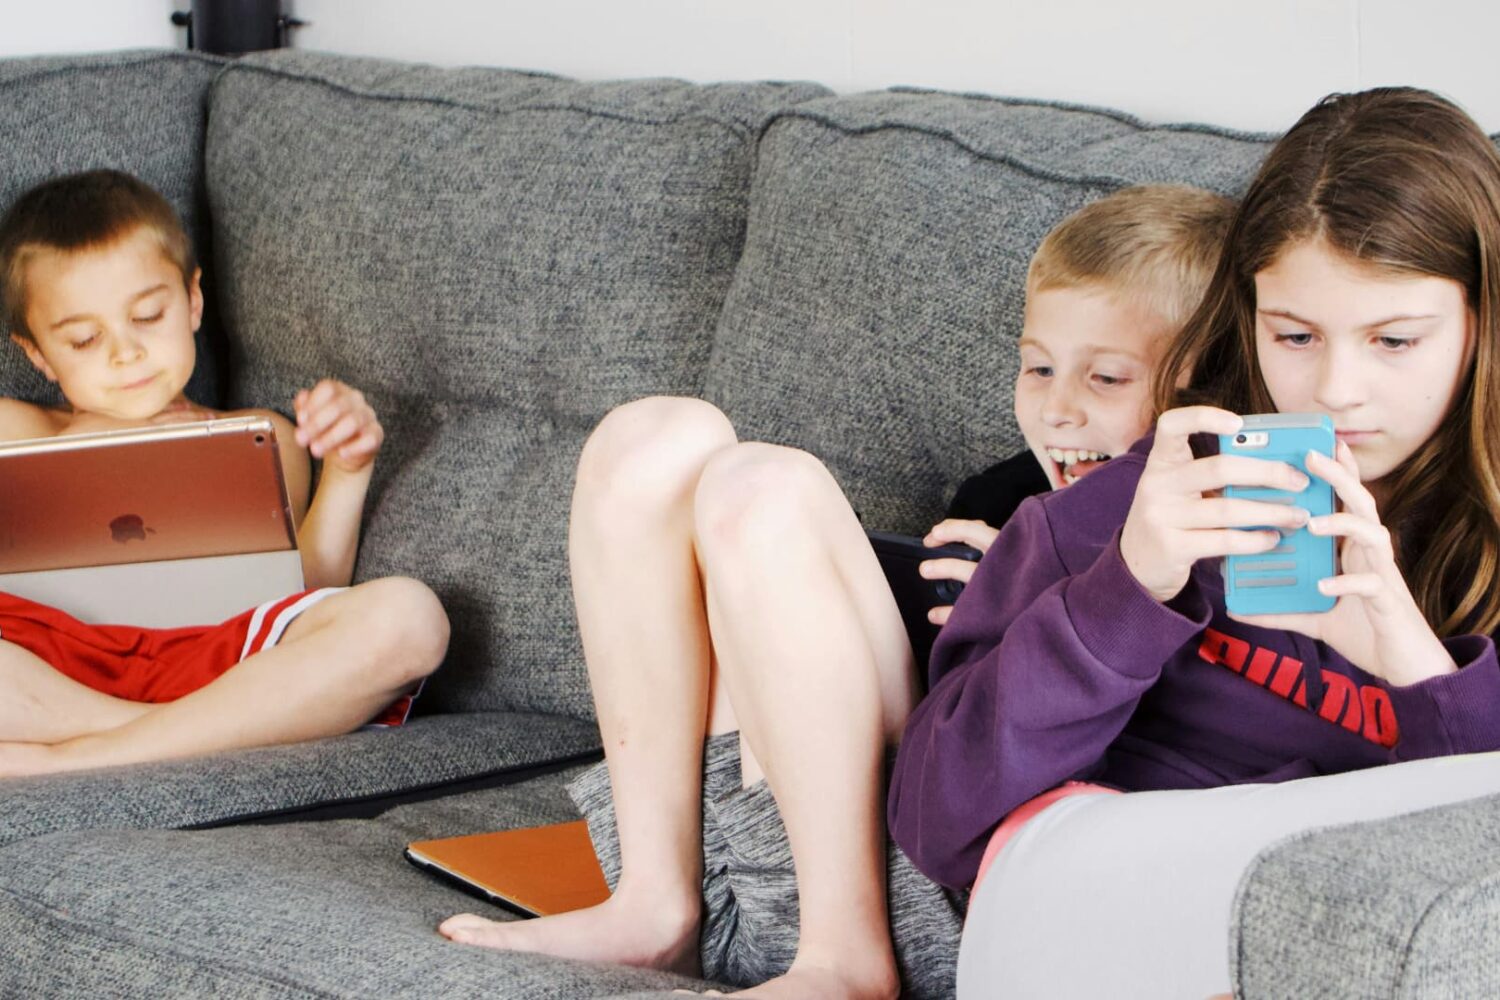 Three children sitting on a sofa and using iPhone and iPad